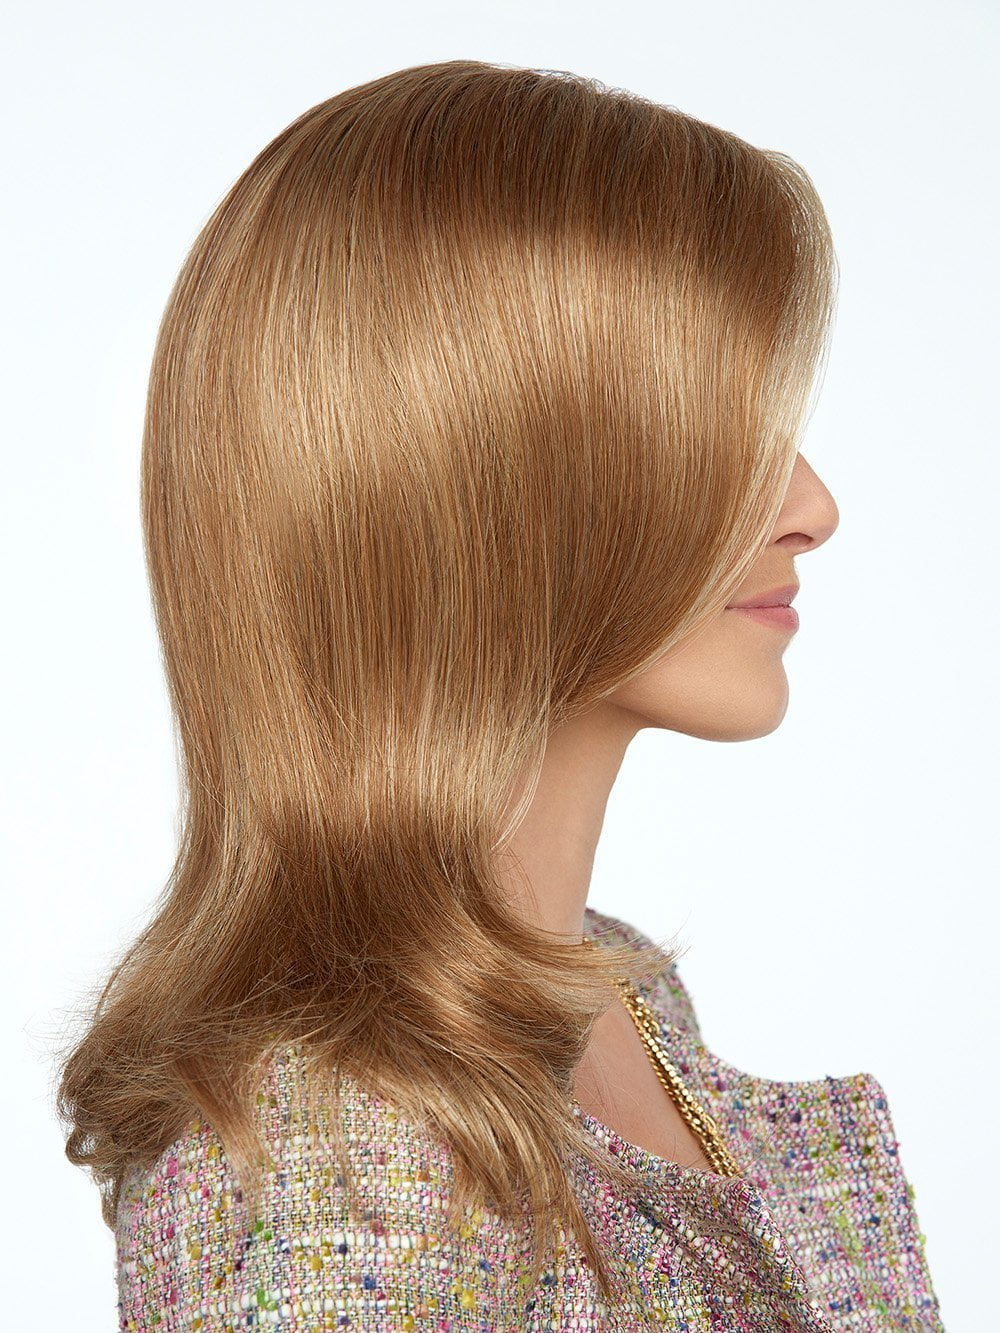 For the woman who craves a longer length but seeks a softer, more sophisticated look